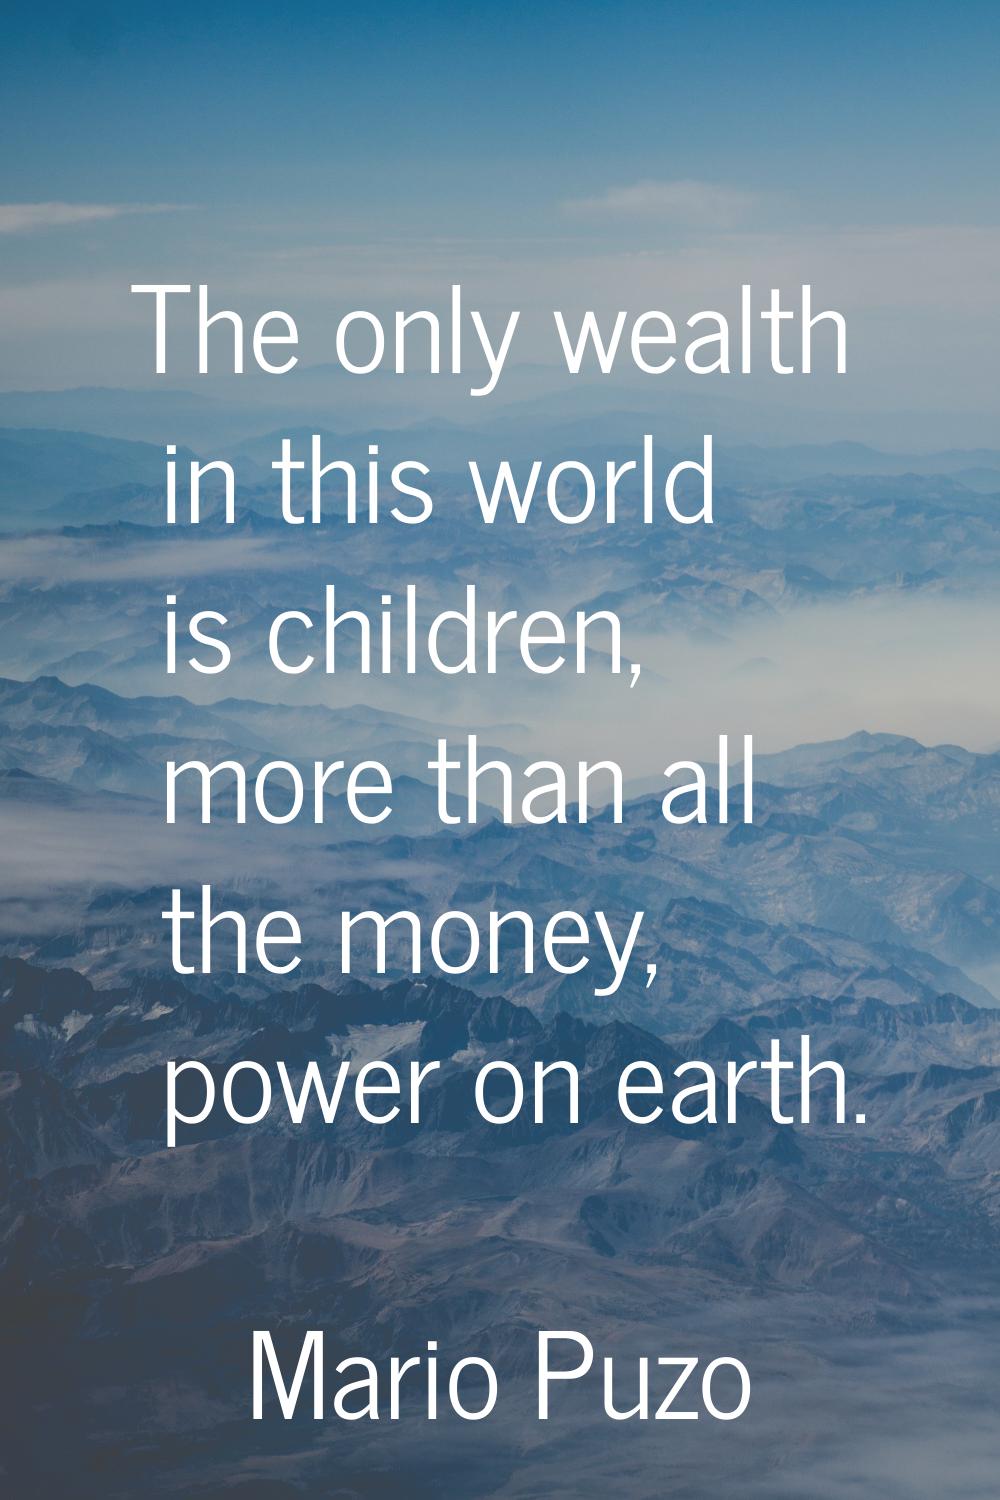 The only wealth in this world is children, more than all the money, power on earth.